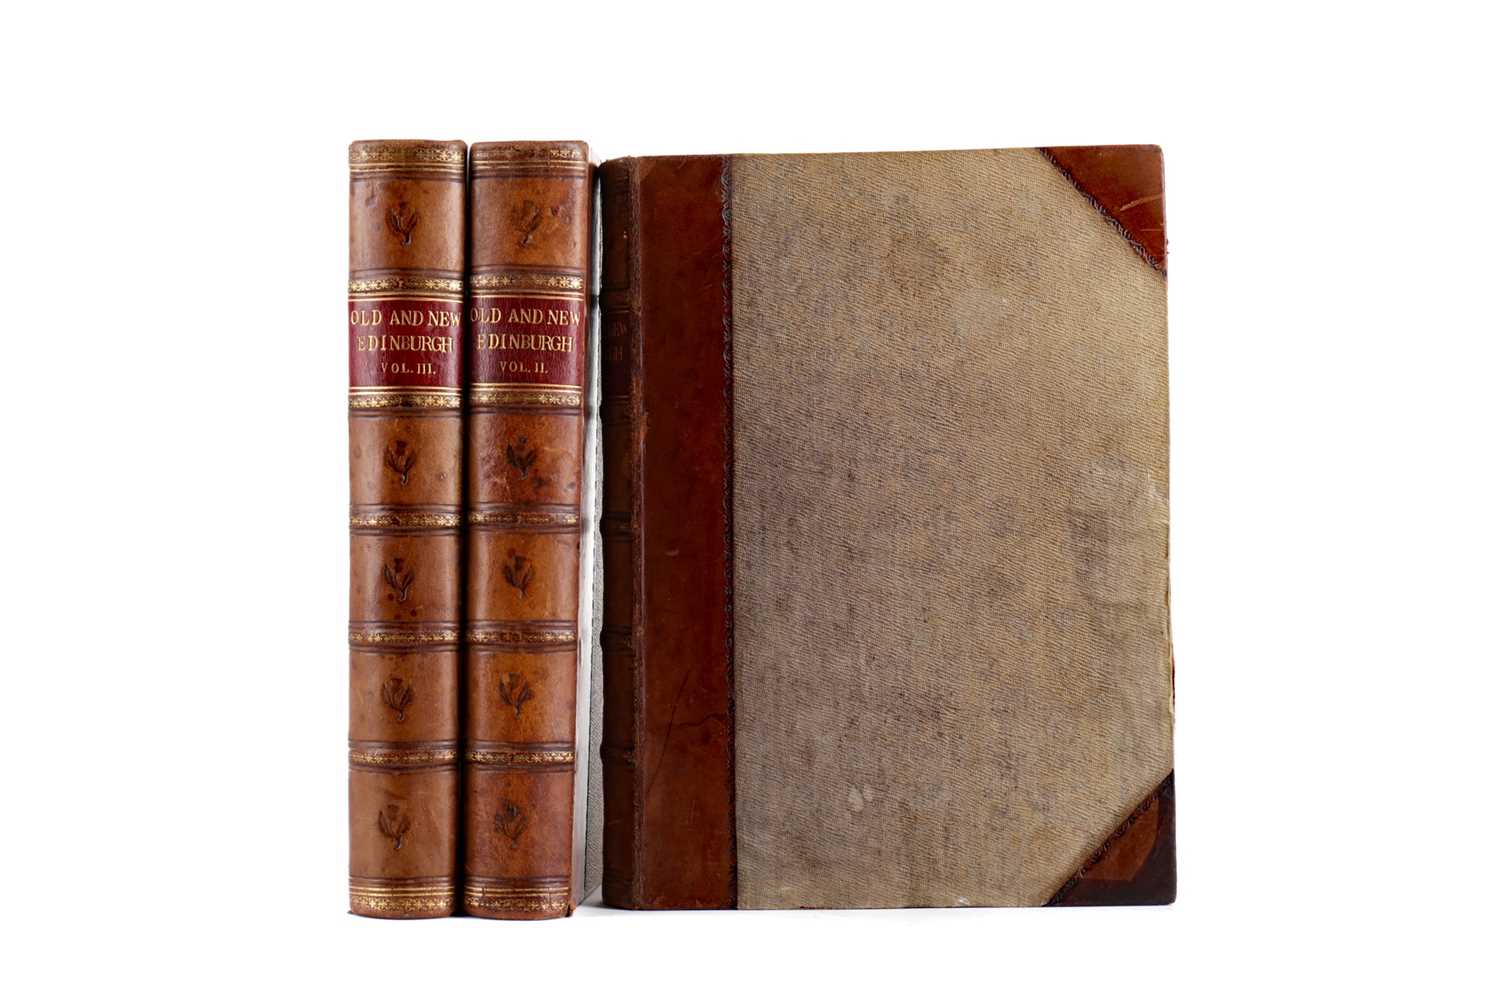 Lot 1092 - THREE VOLUMES OF OLD AND NEW EDINBURGH BY JAMES GRANT